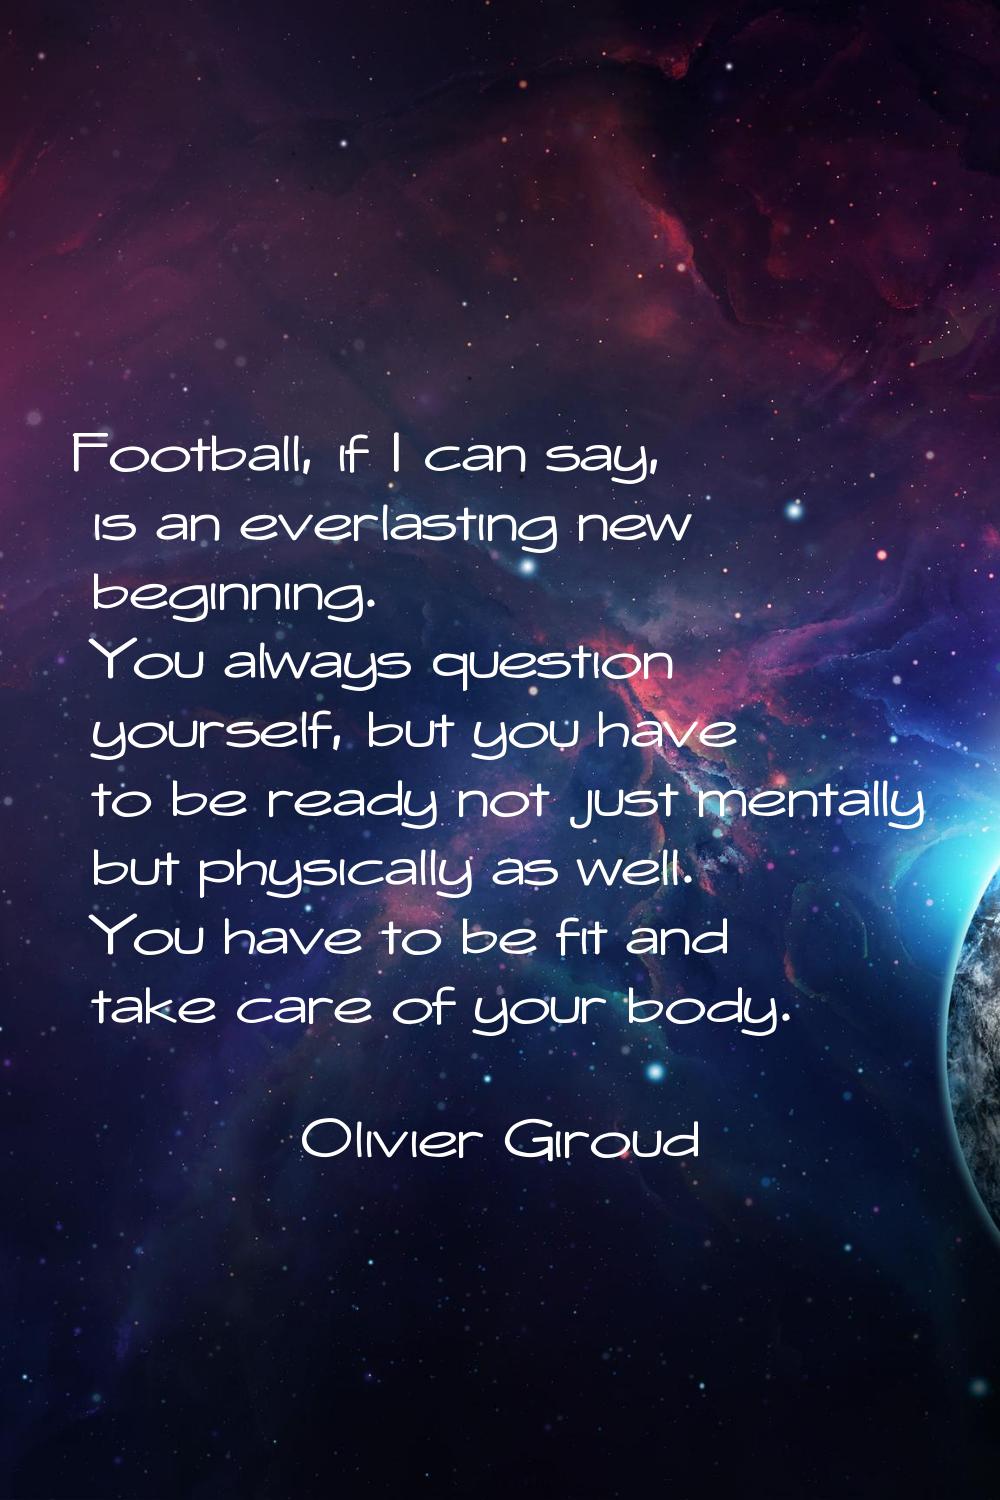 Football, if I can say, is an everlasting new beginning. You always question yourself, but you have